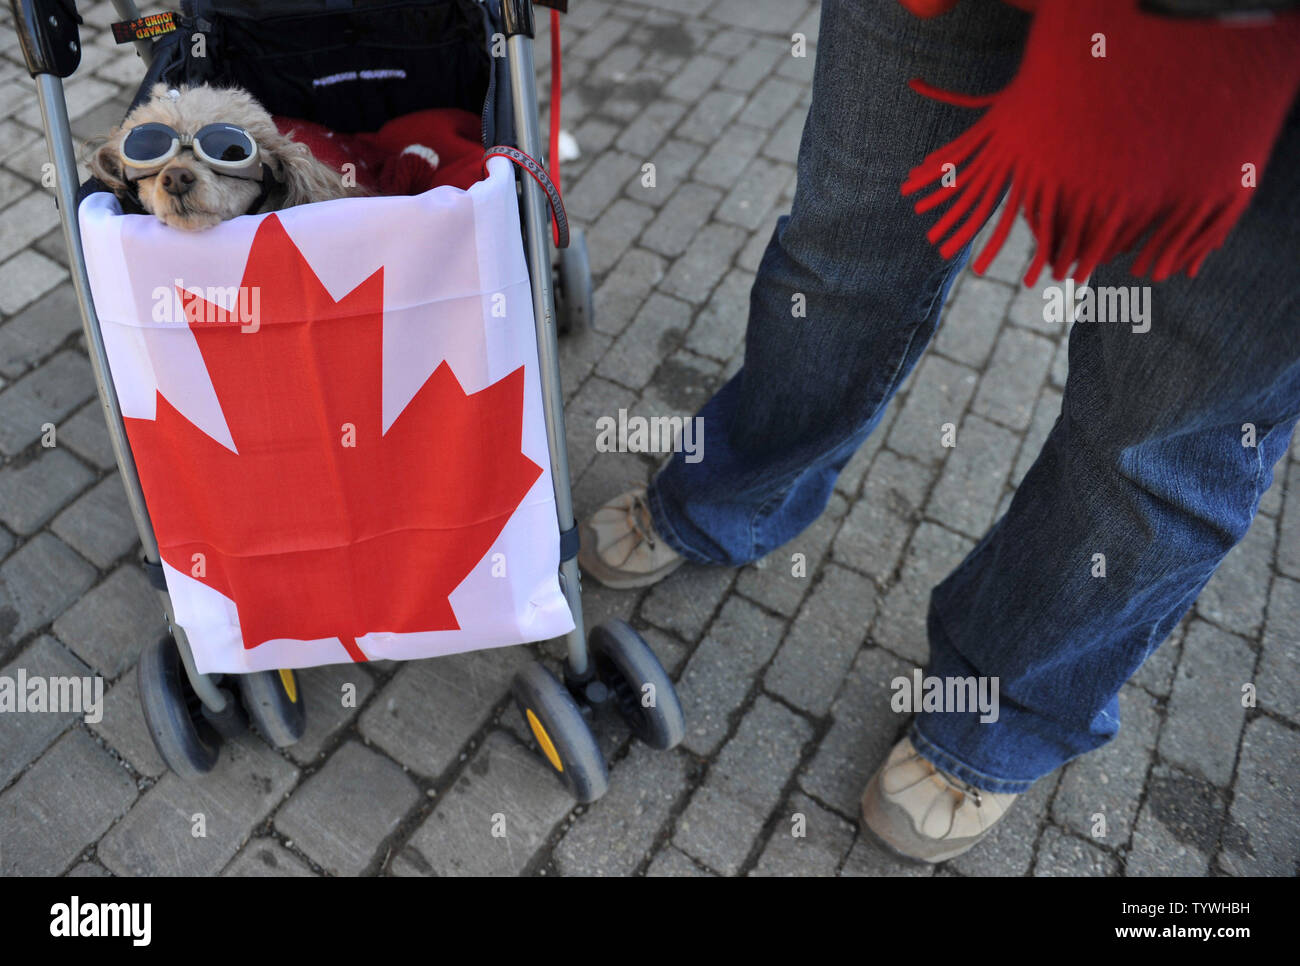 Teddy, a poodle mix, shows her support for Canada as she rides in a stroller, in Whistler, Canada, during the 2010 Vancouver Winter Olympics, February 21, 2010.   UPI/Kevin Dietsch Stock Photo